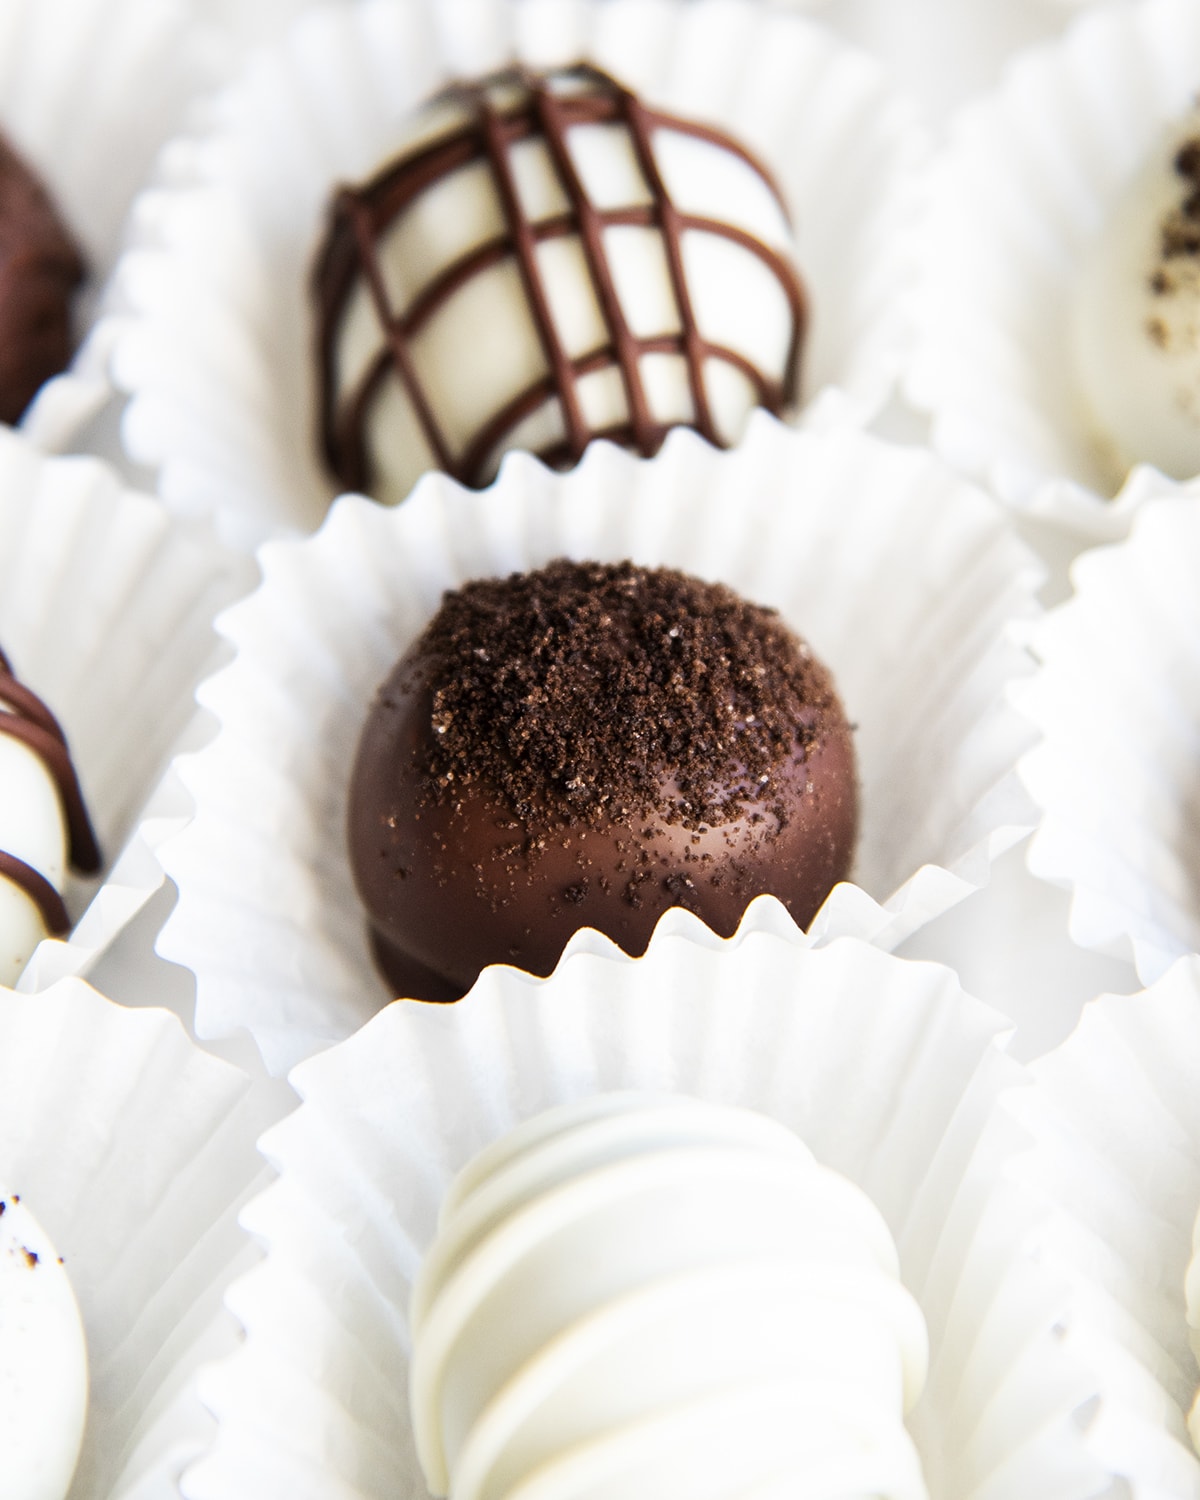 A close up of a chocolate covered Oreo ball topped with Oreo crumbs set in a white paper liner.